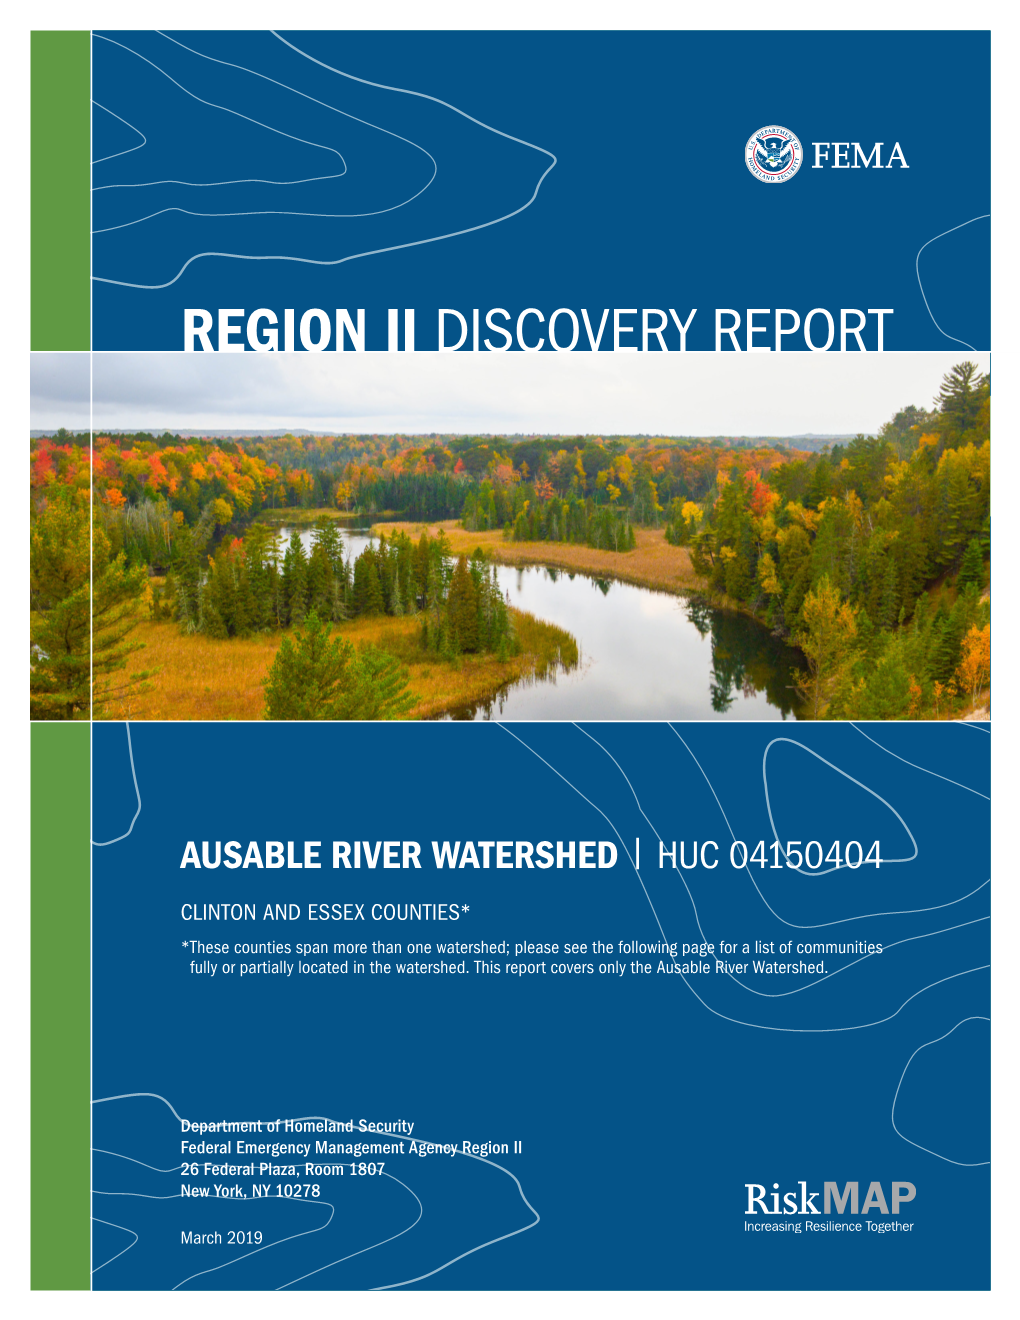 Flood Risk Discovery Report Ausable River Watershed